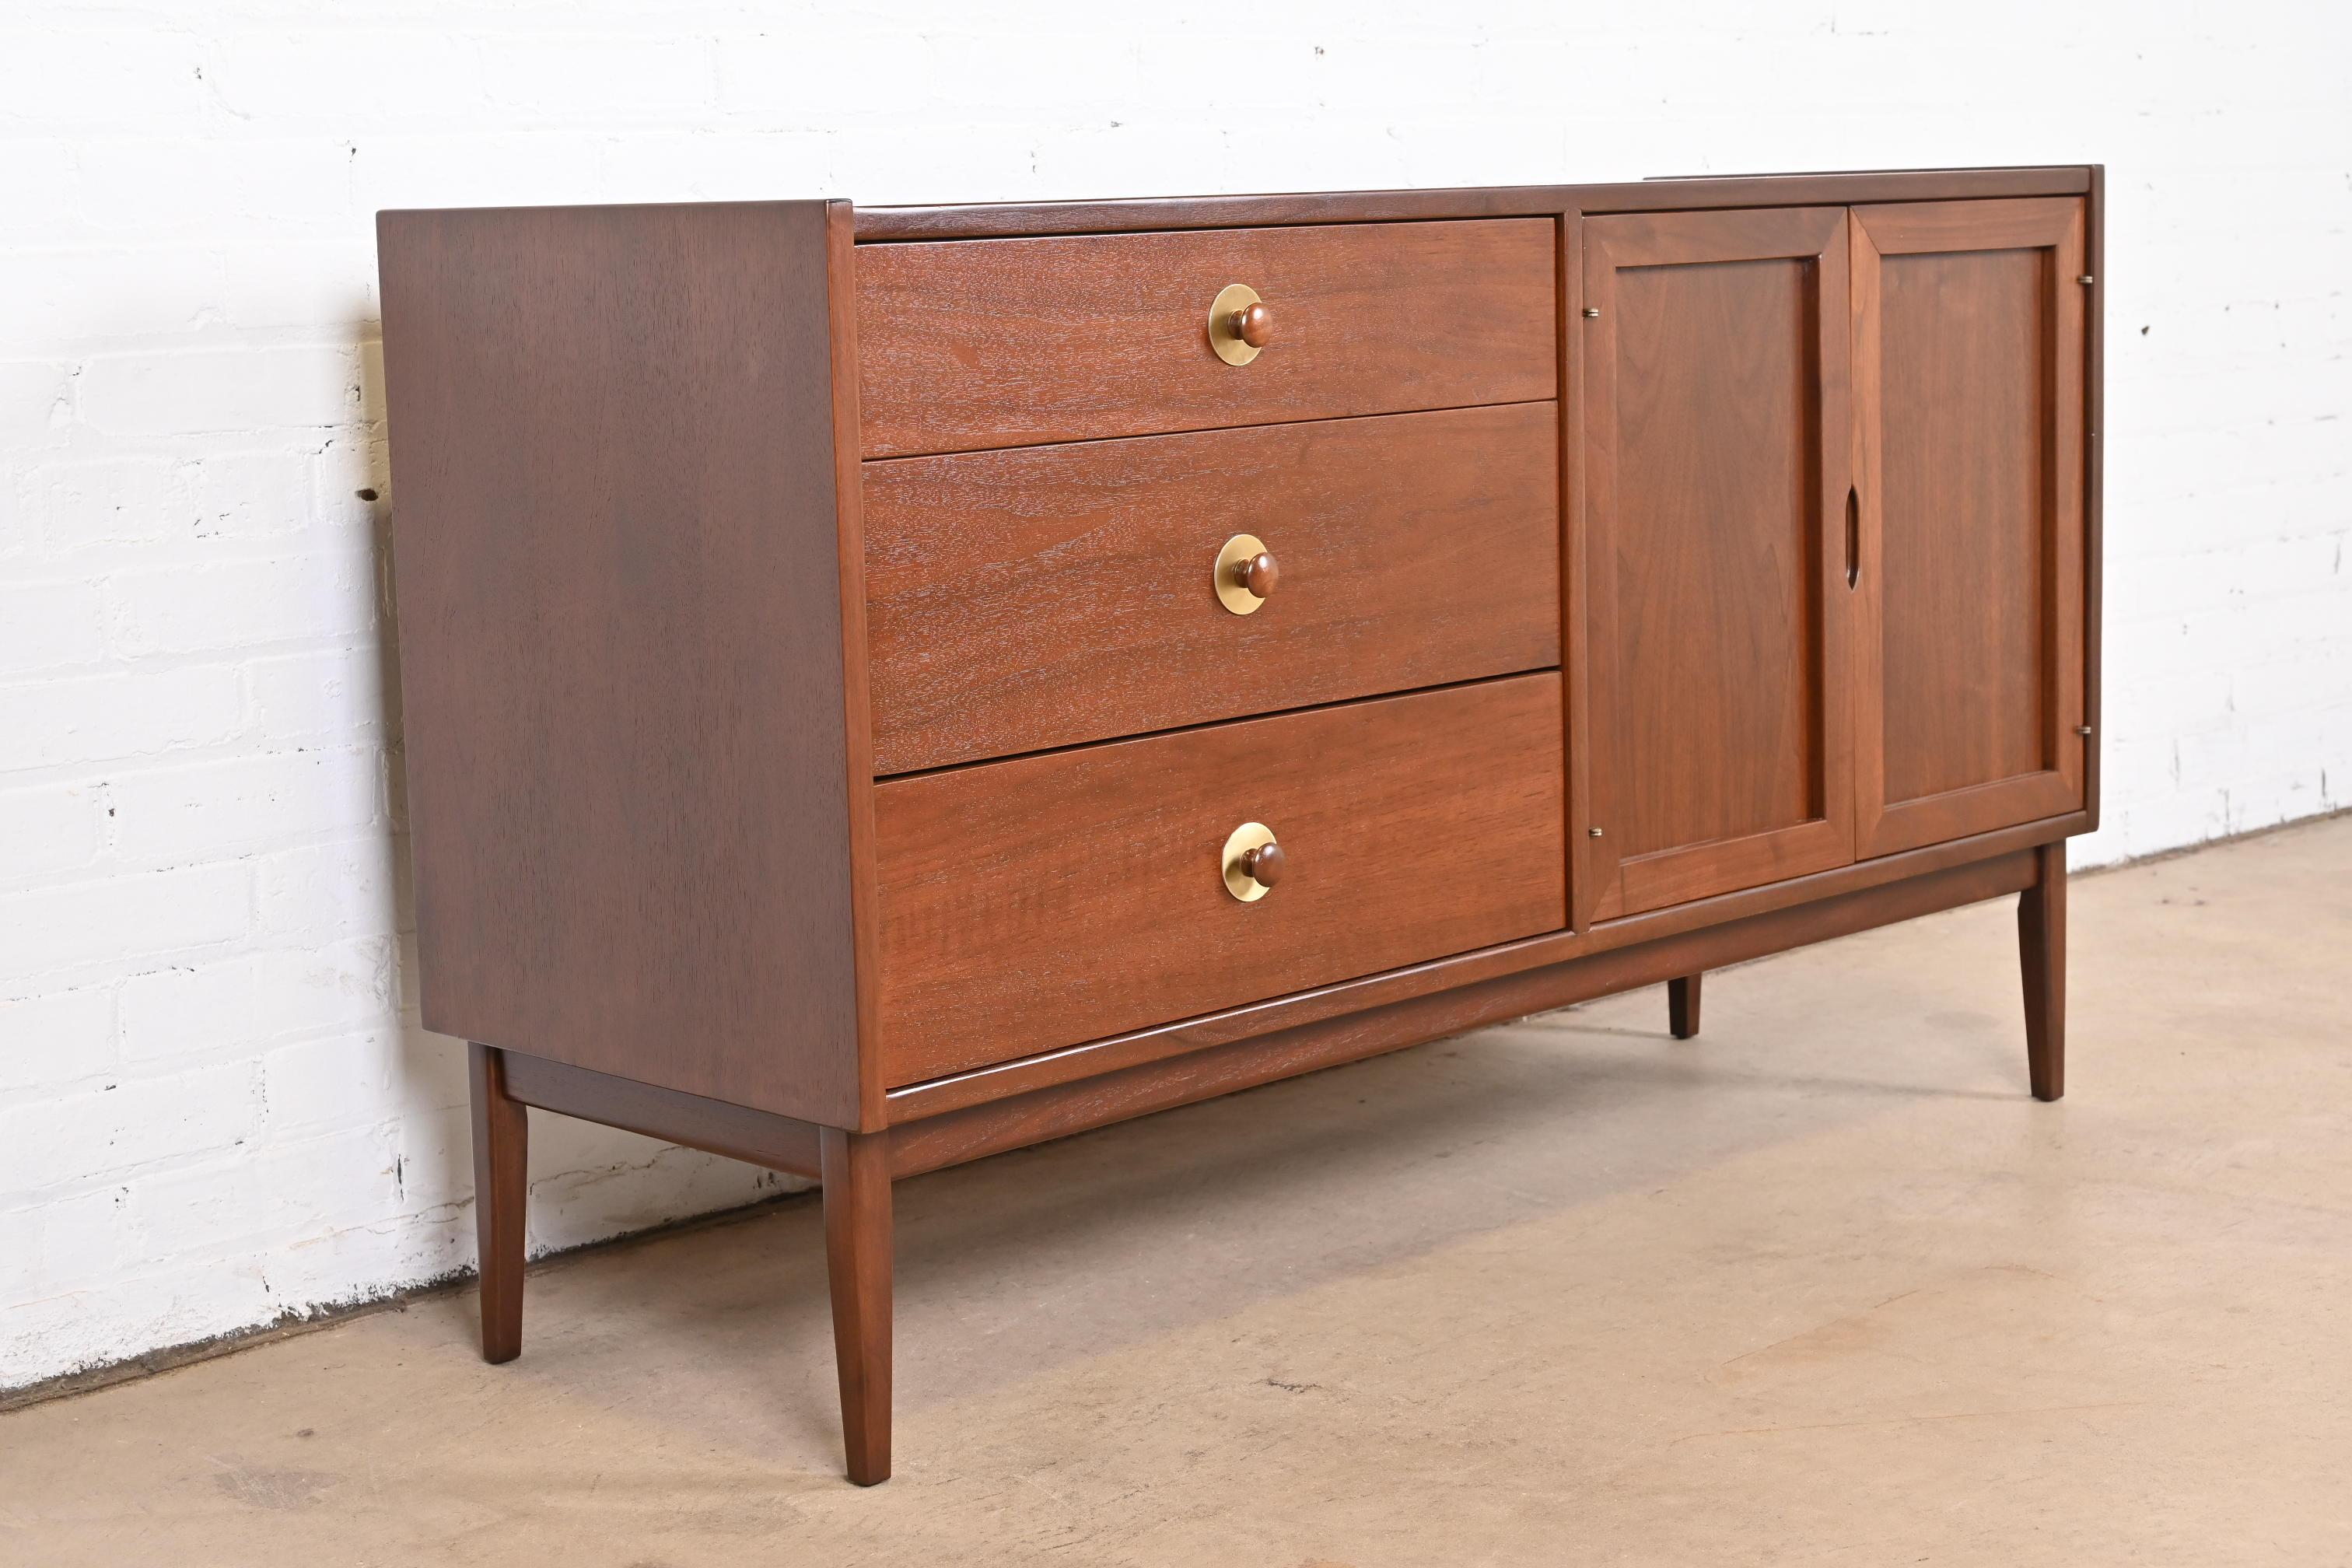 Mid-20th Century Jack Cartwright for Founders Mid-Century Modern Walnut Credenza, Refinished